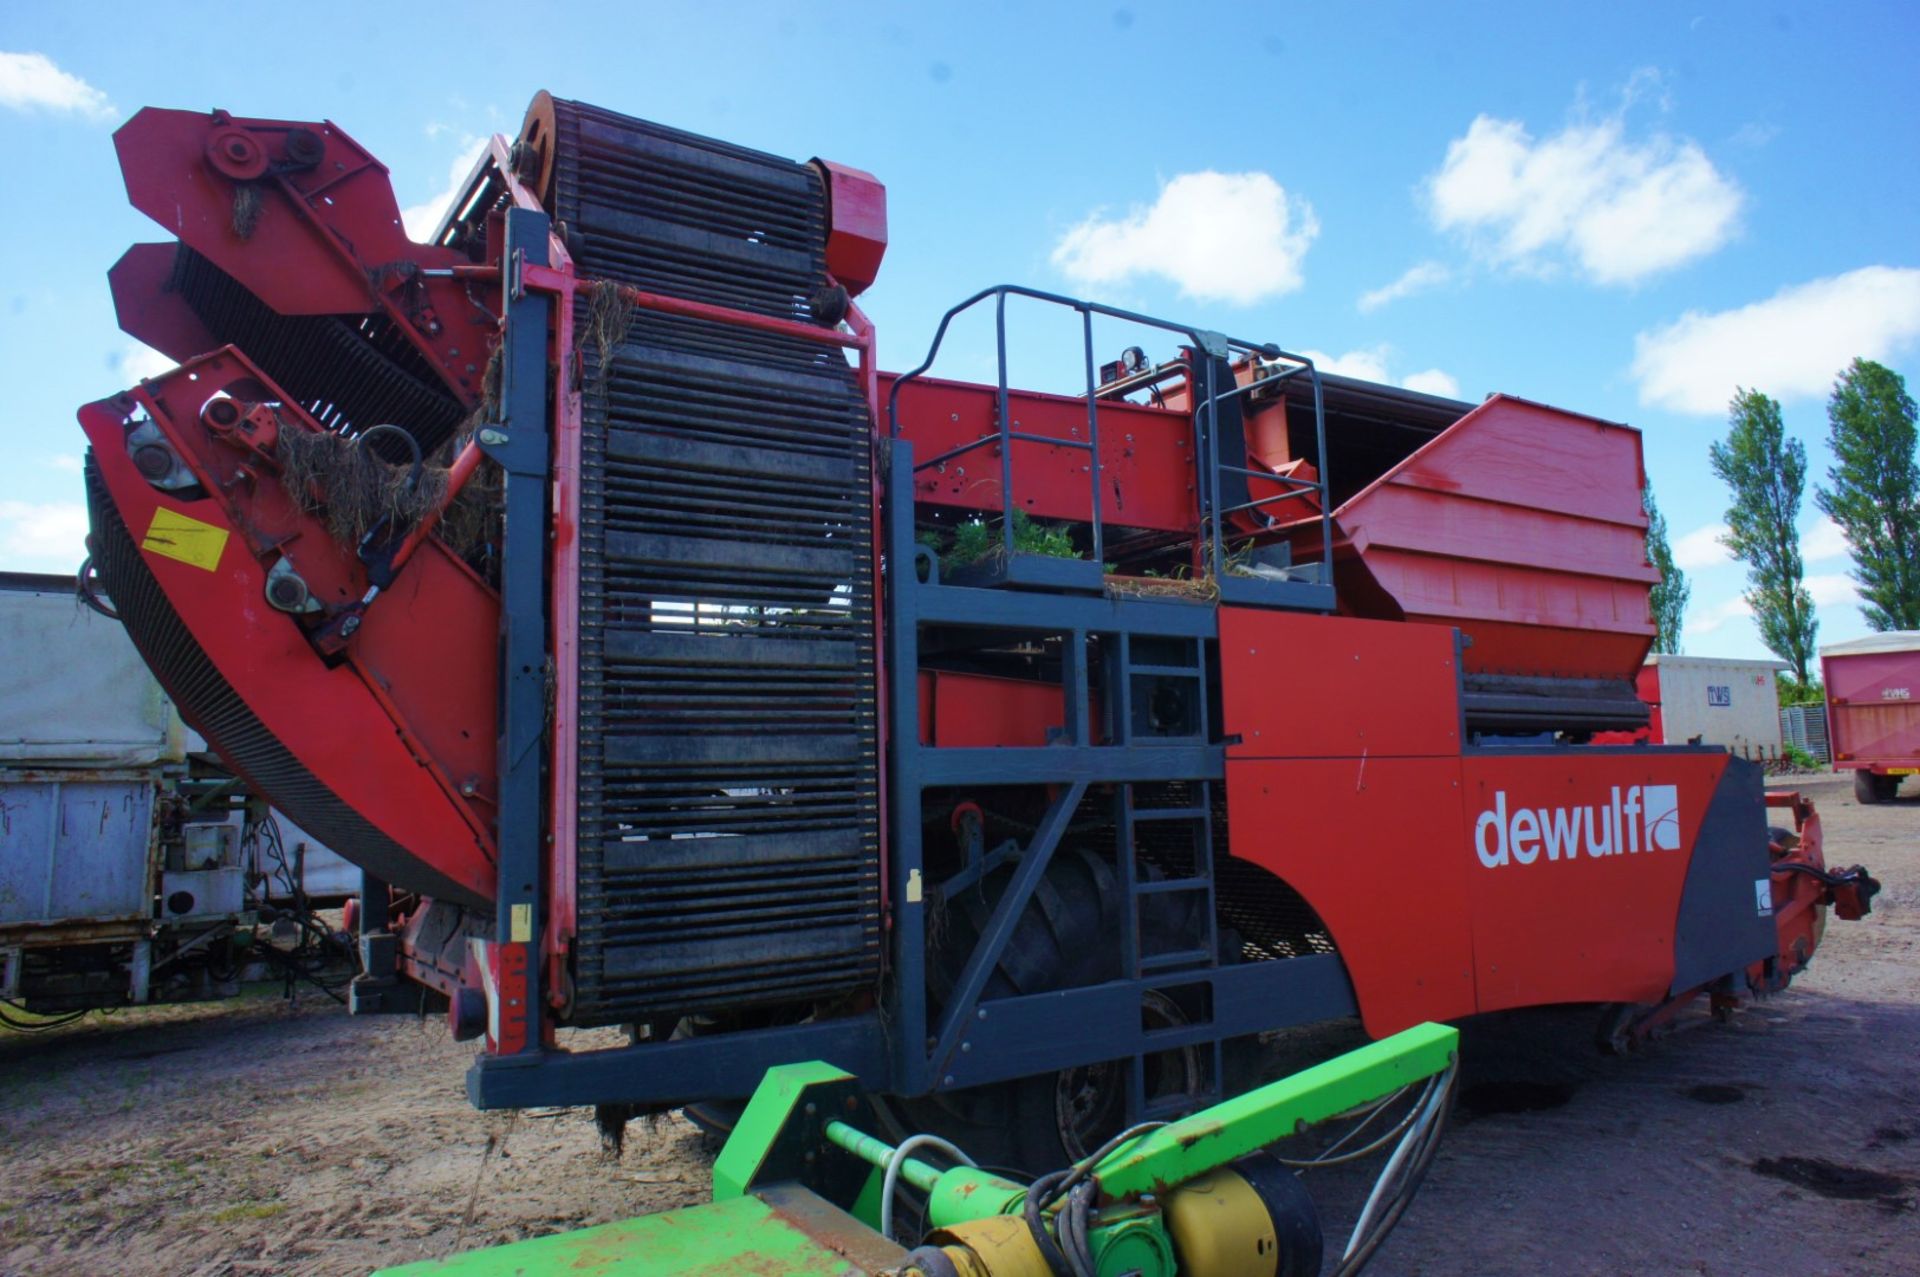 Dewulf RS2060 Trailed 2-Row Sieving Harvester, Serial Number 5811679, Year 2011 - Image 5 of 10